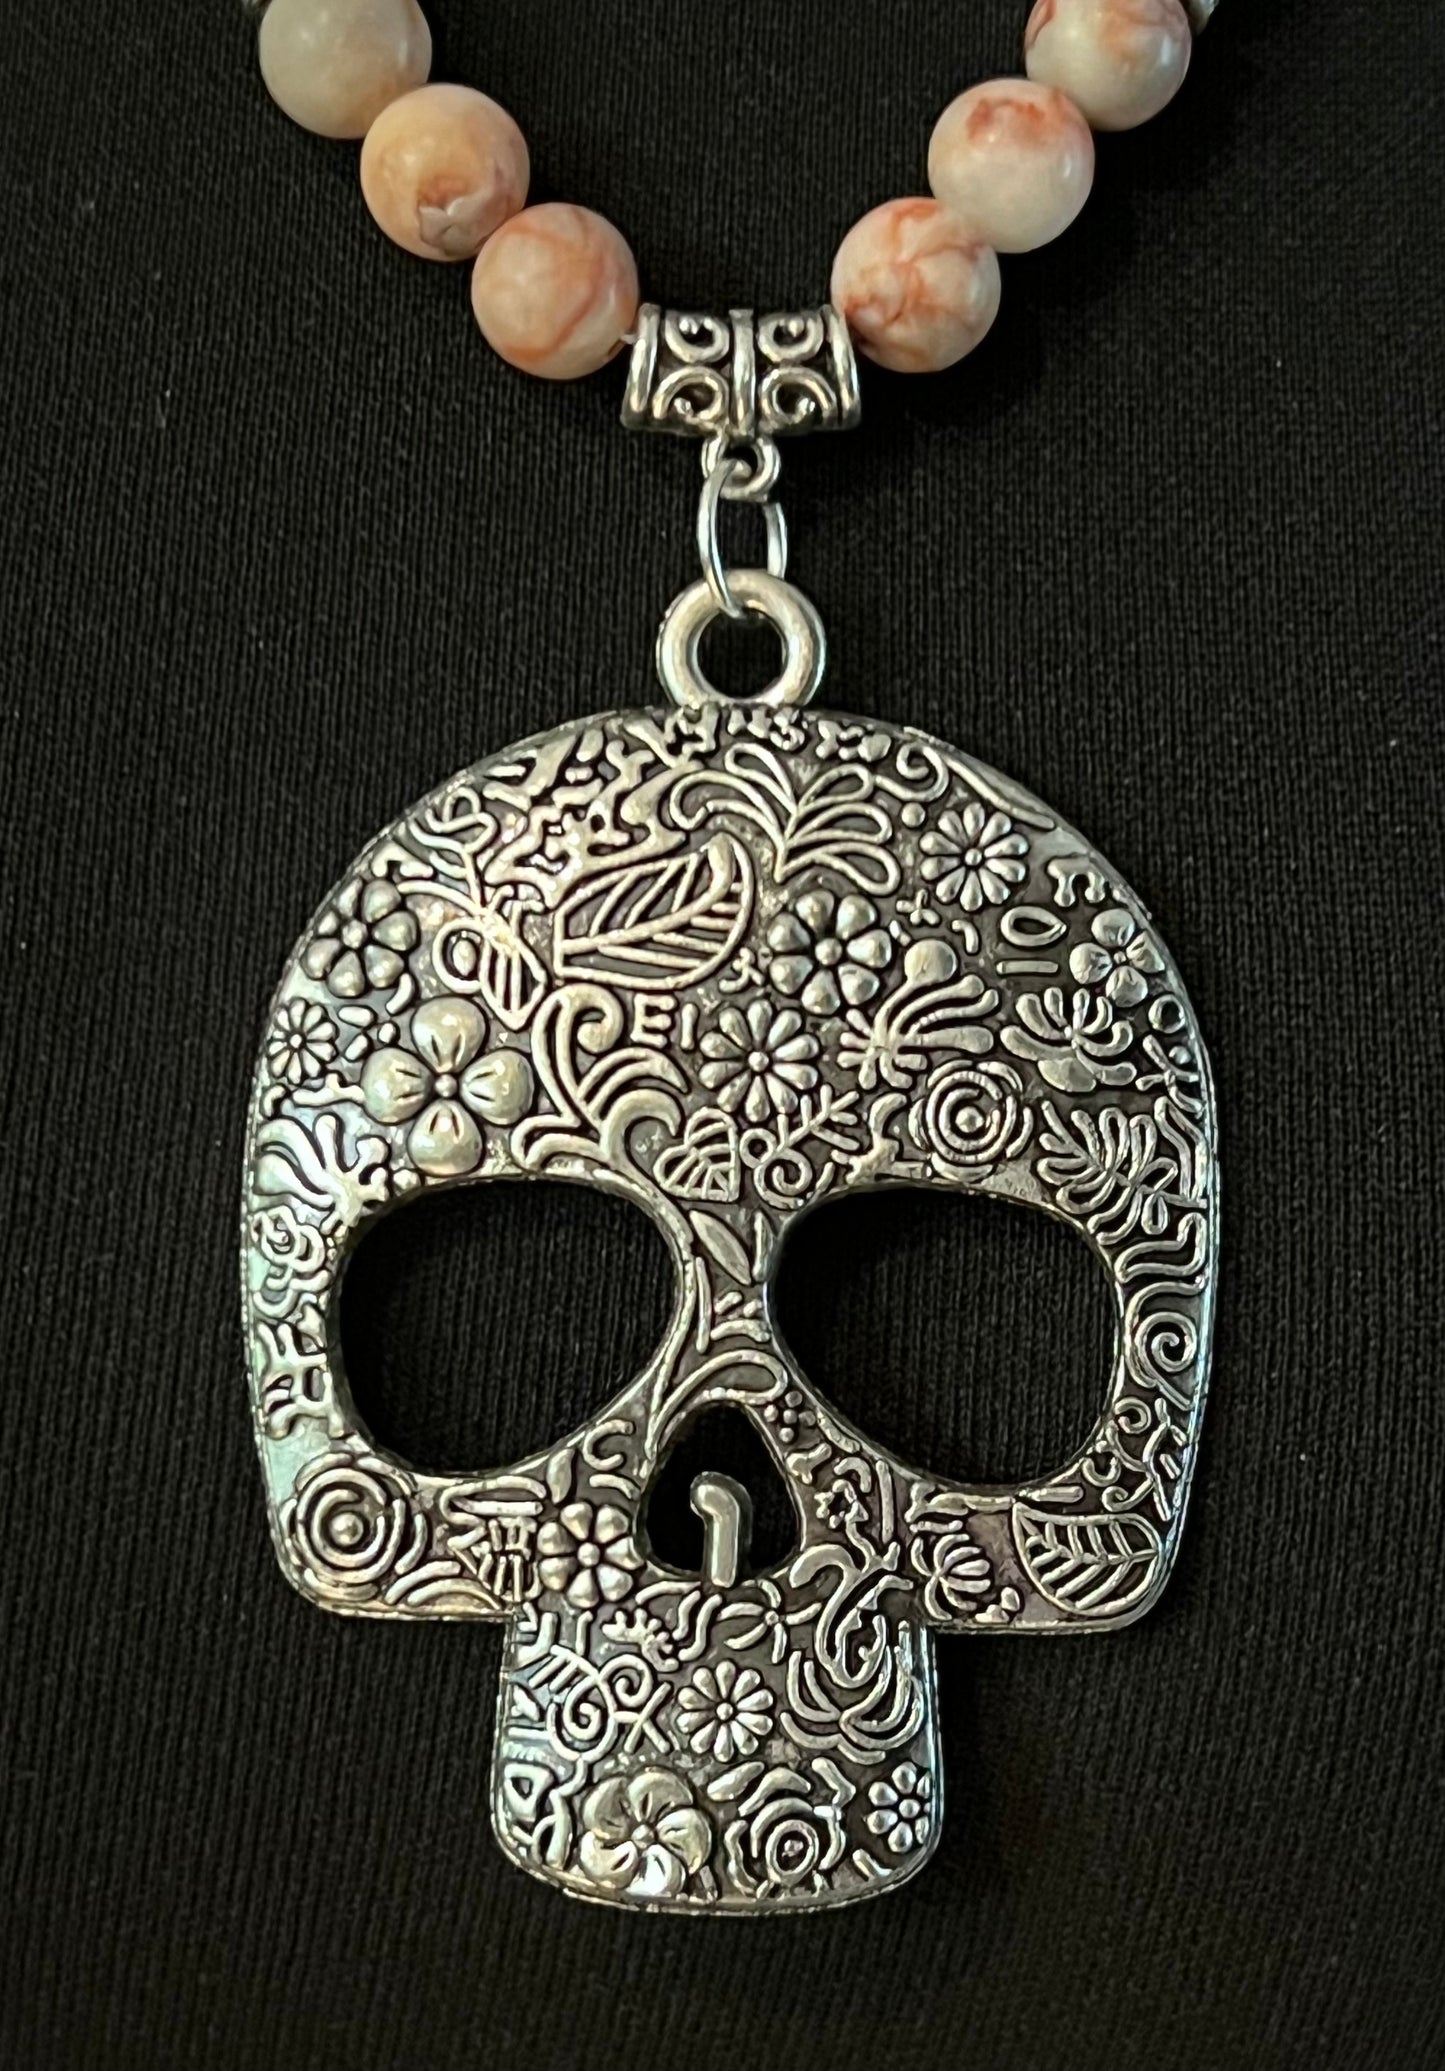 Mexican Inspired Oversized Skull Necklace with Natural Matte Veined Jasper Beads